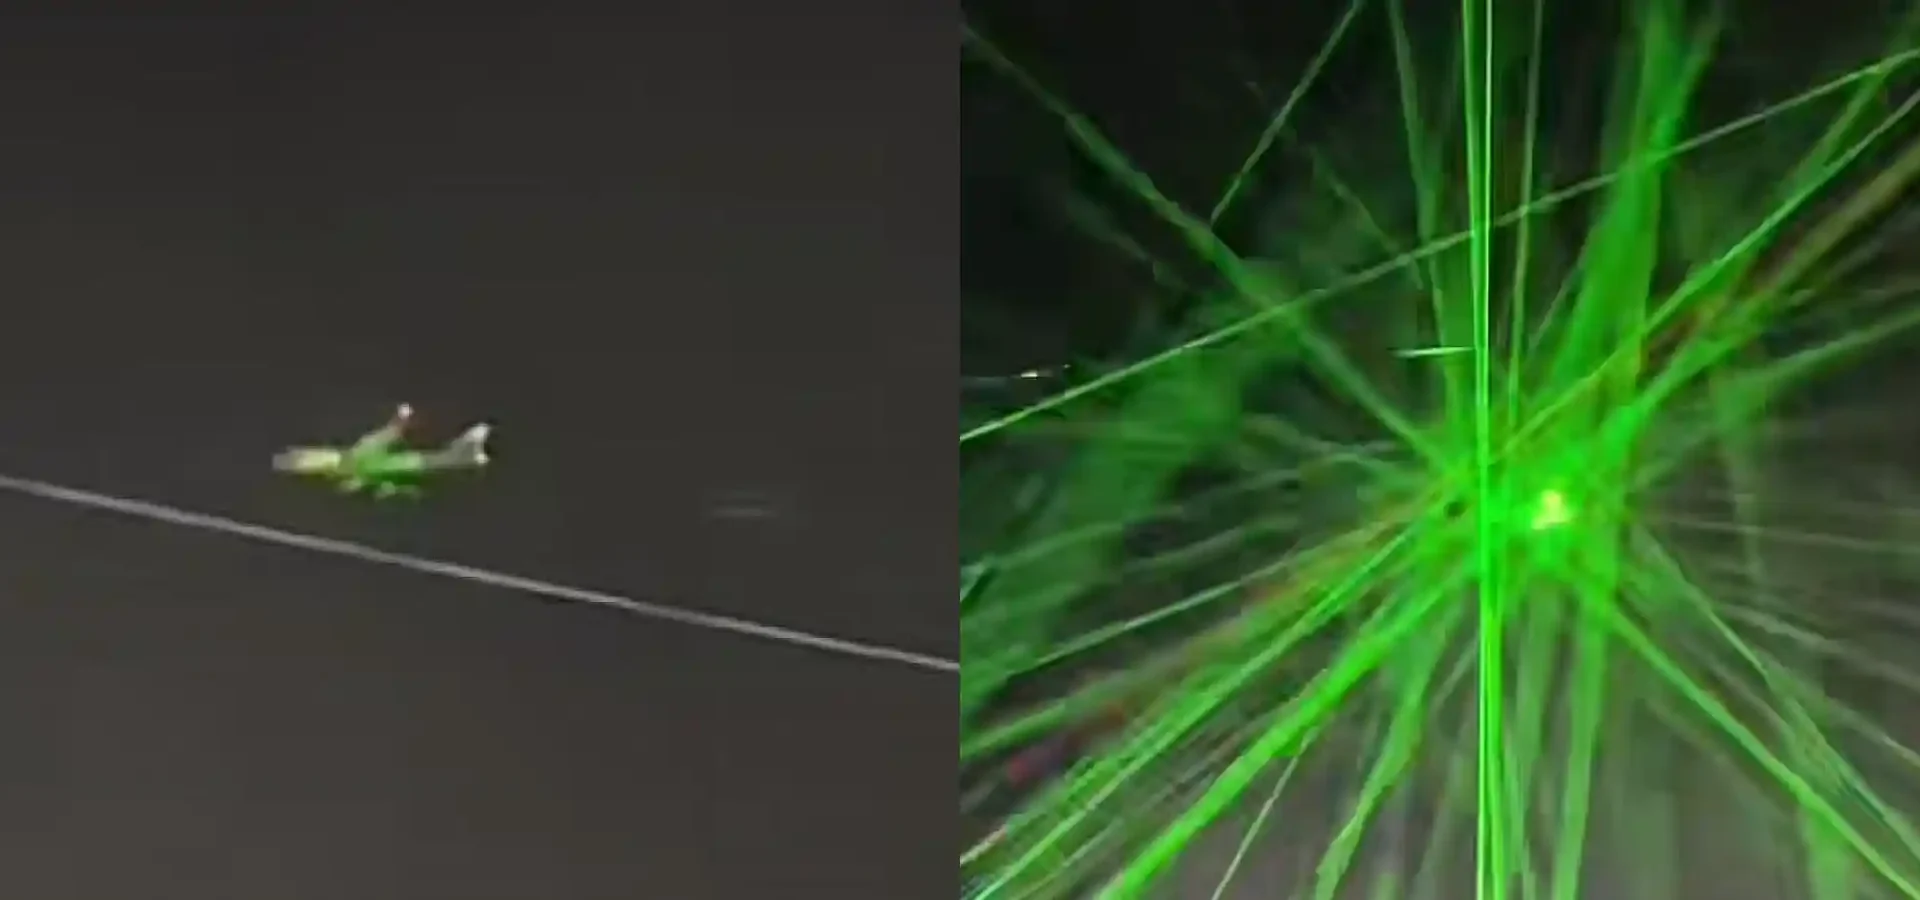 An airplane being targeted by hundreds of green laser pointers